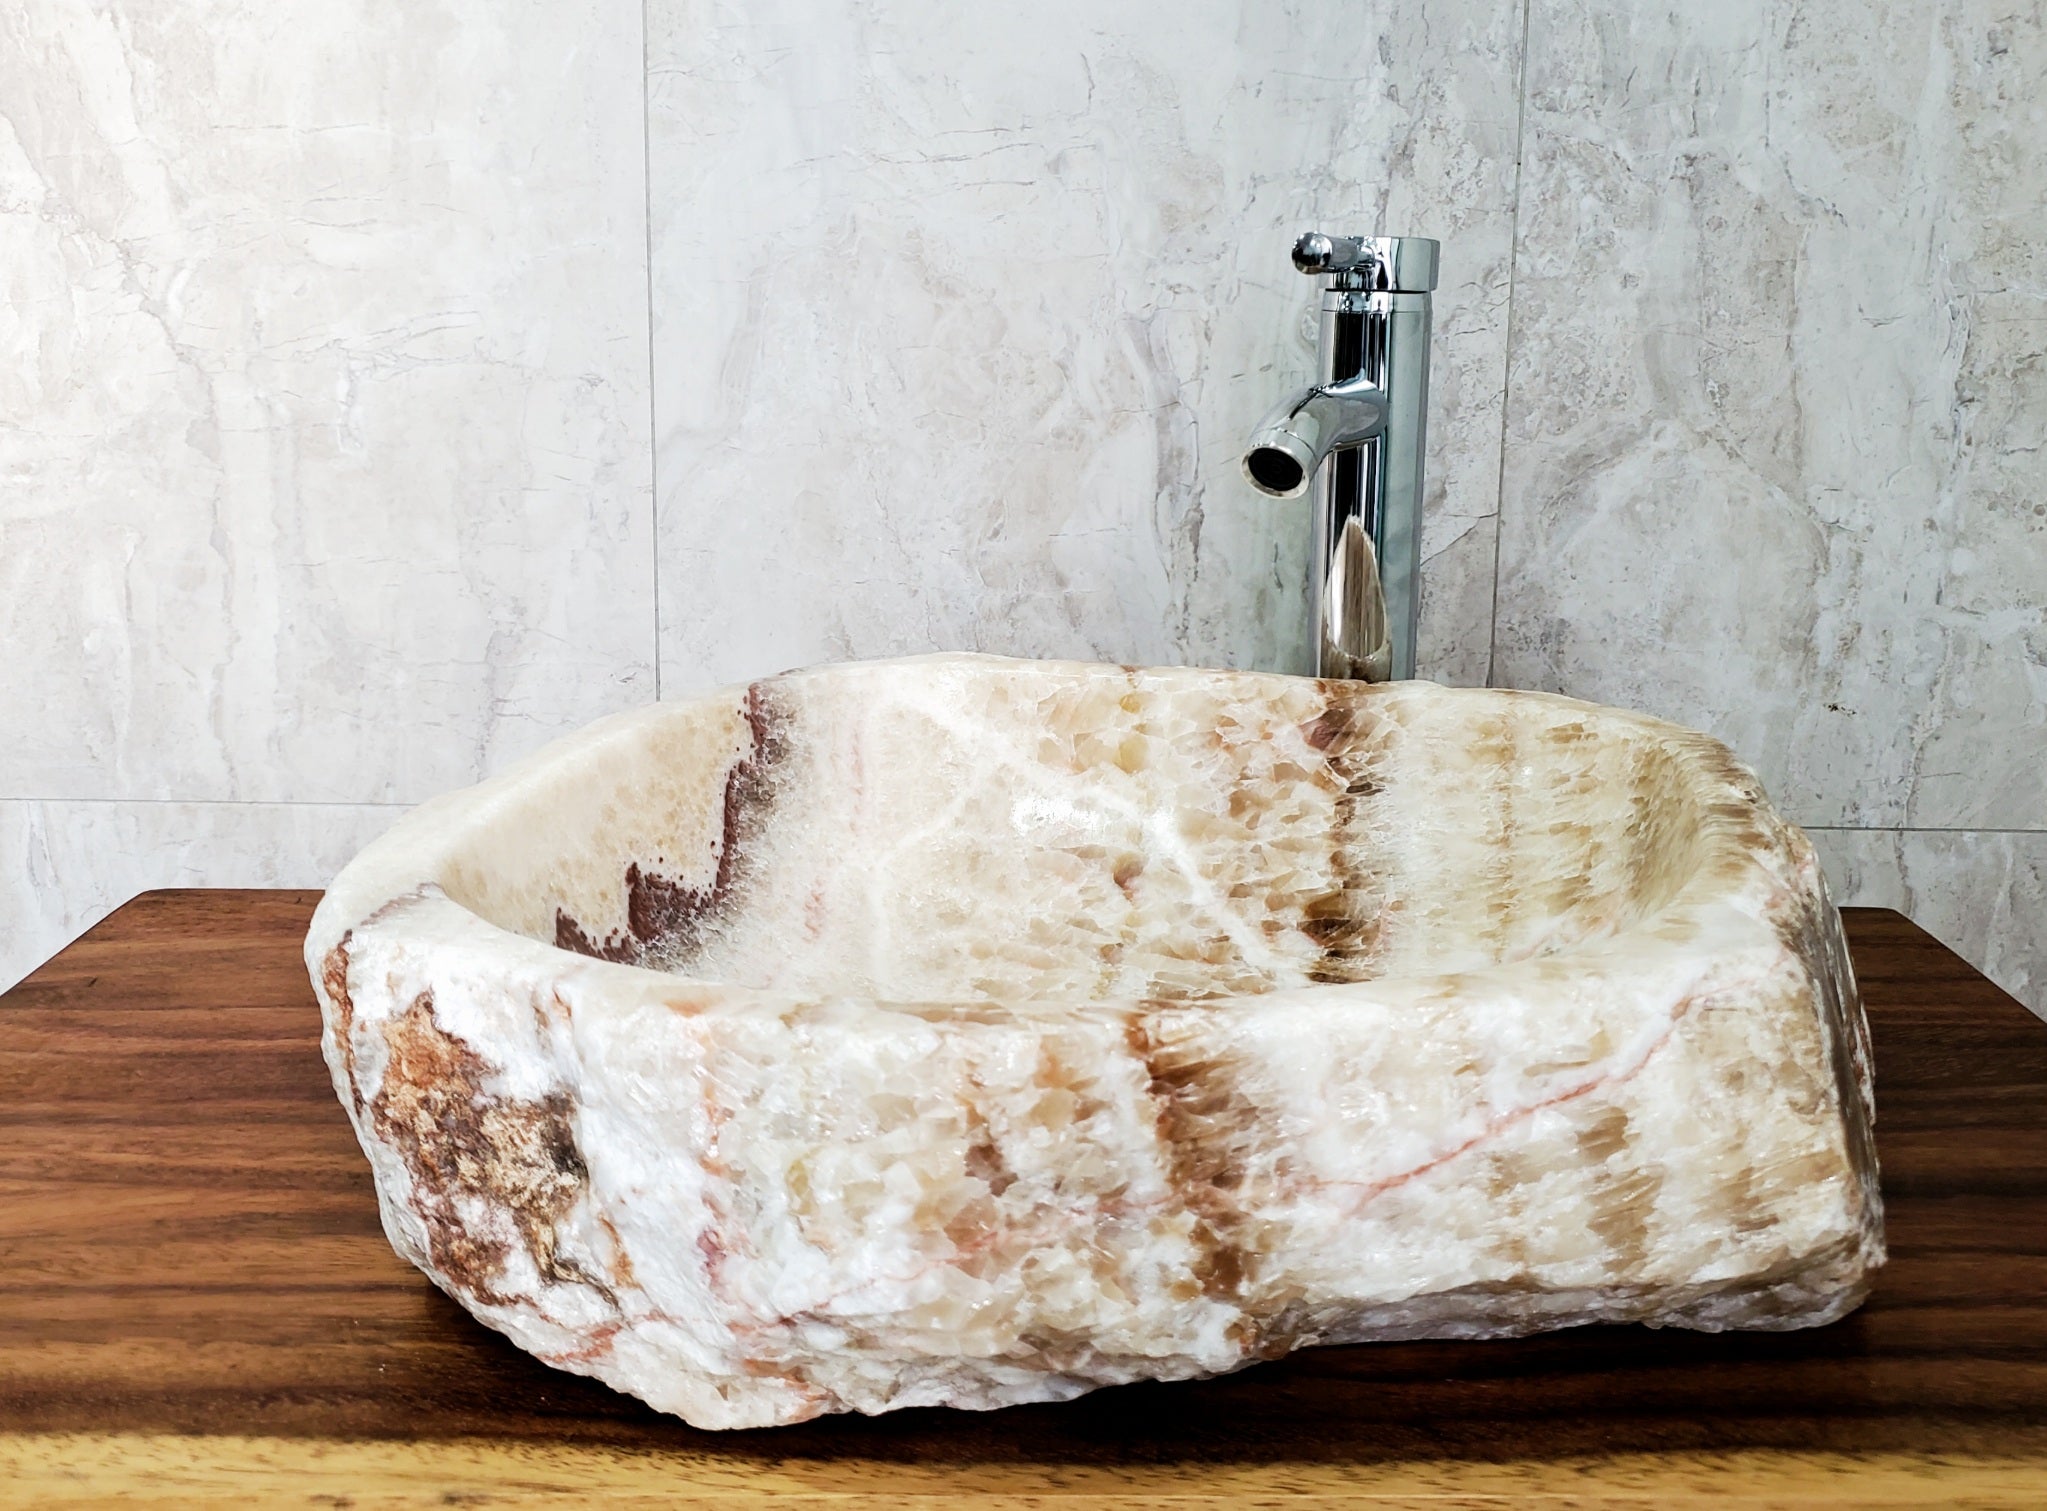 Brown and Tan Onyx Stone  Bathroom Vessel Sink. Epoxy Sealant is available with fast shipping. Standard drain size. A beautiful work of rustic art. Handmade. Buy Now at www.felipeandgrace.com